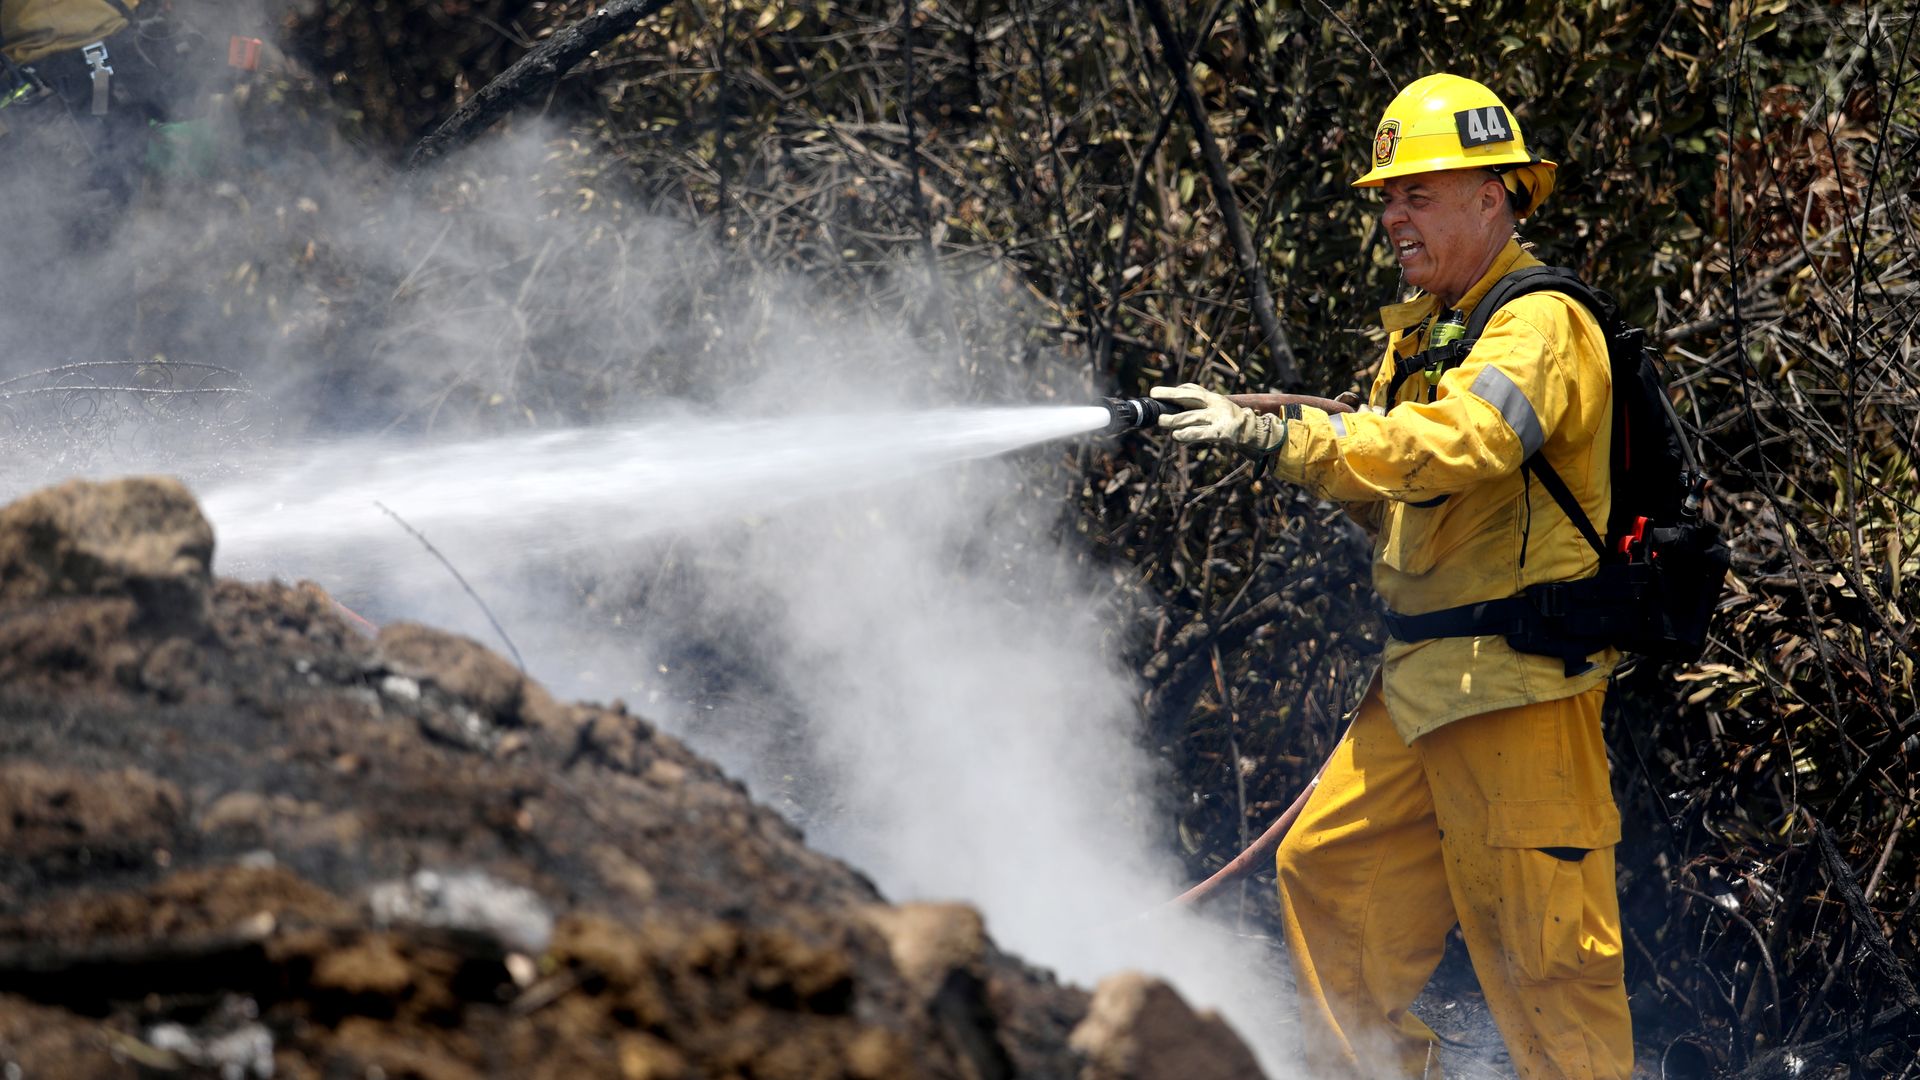 Firefighter with a hose putting out a brush fire.